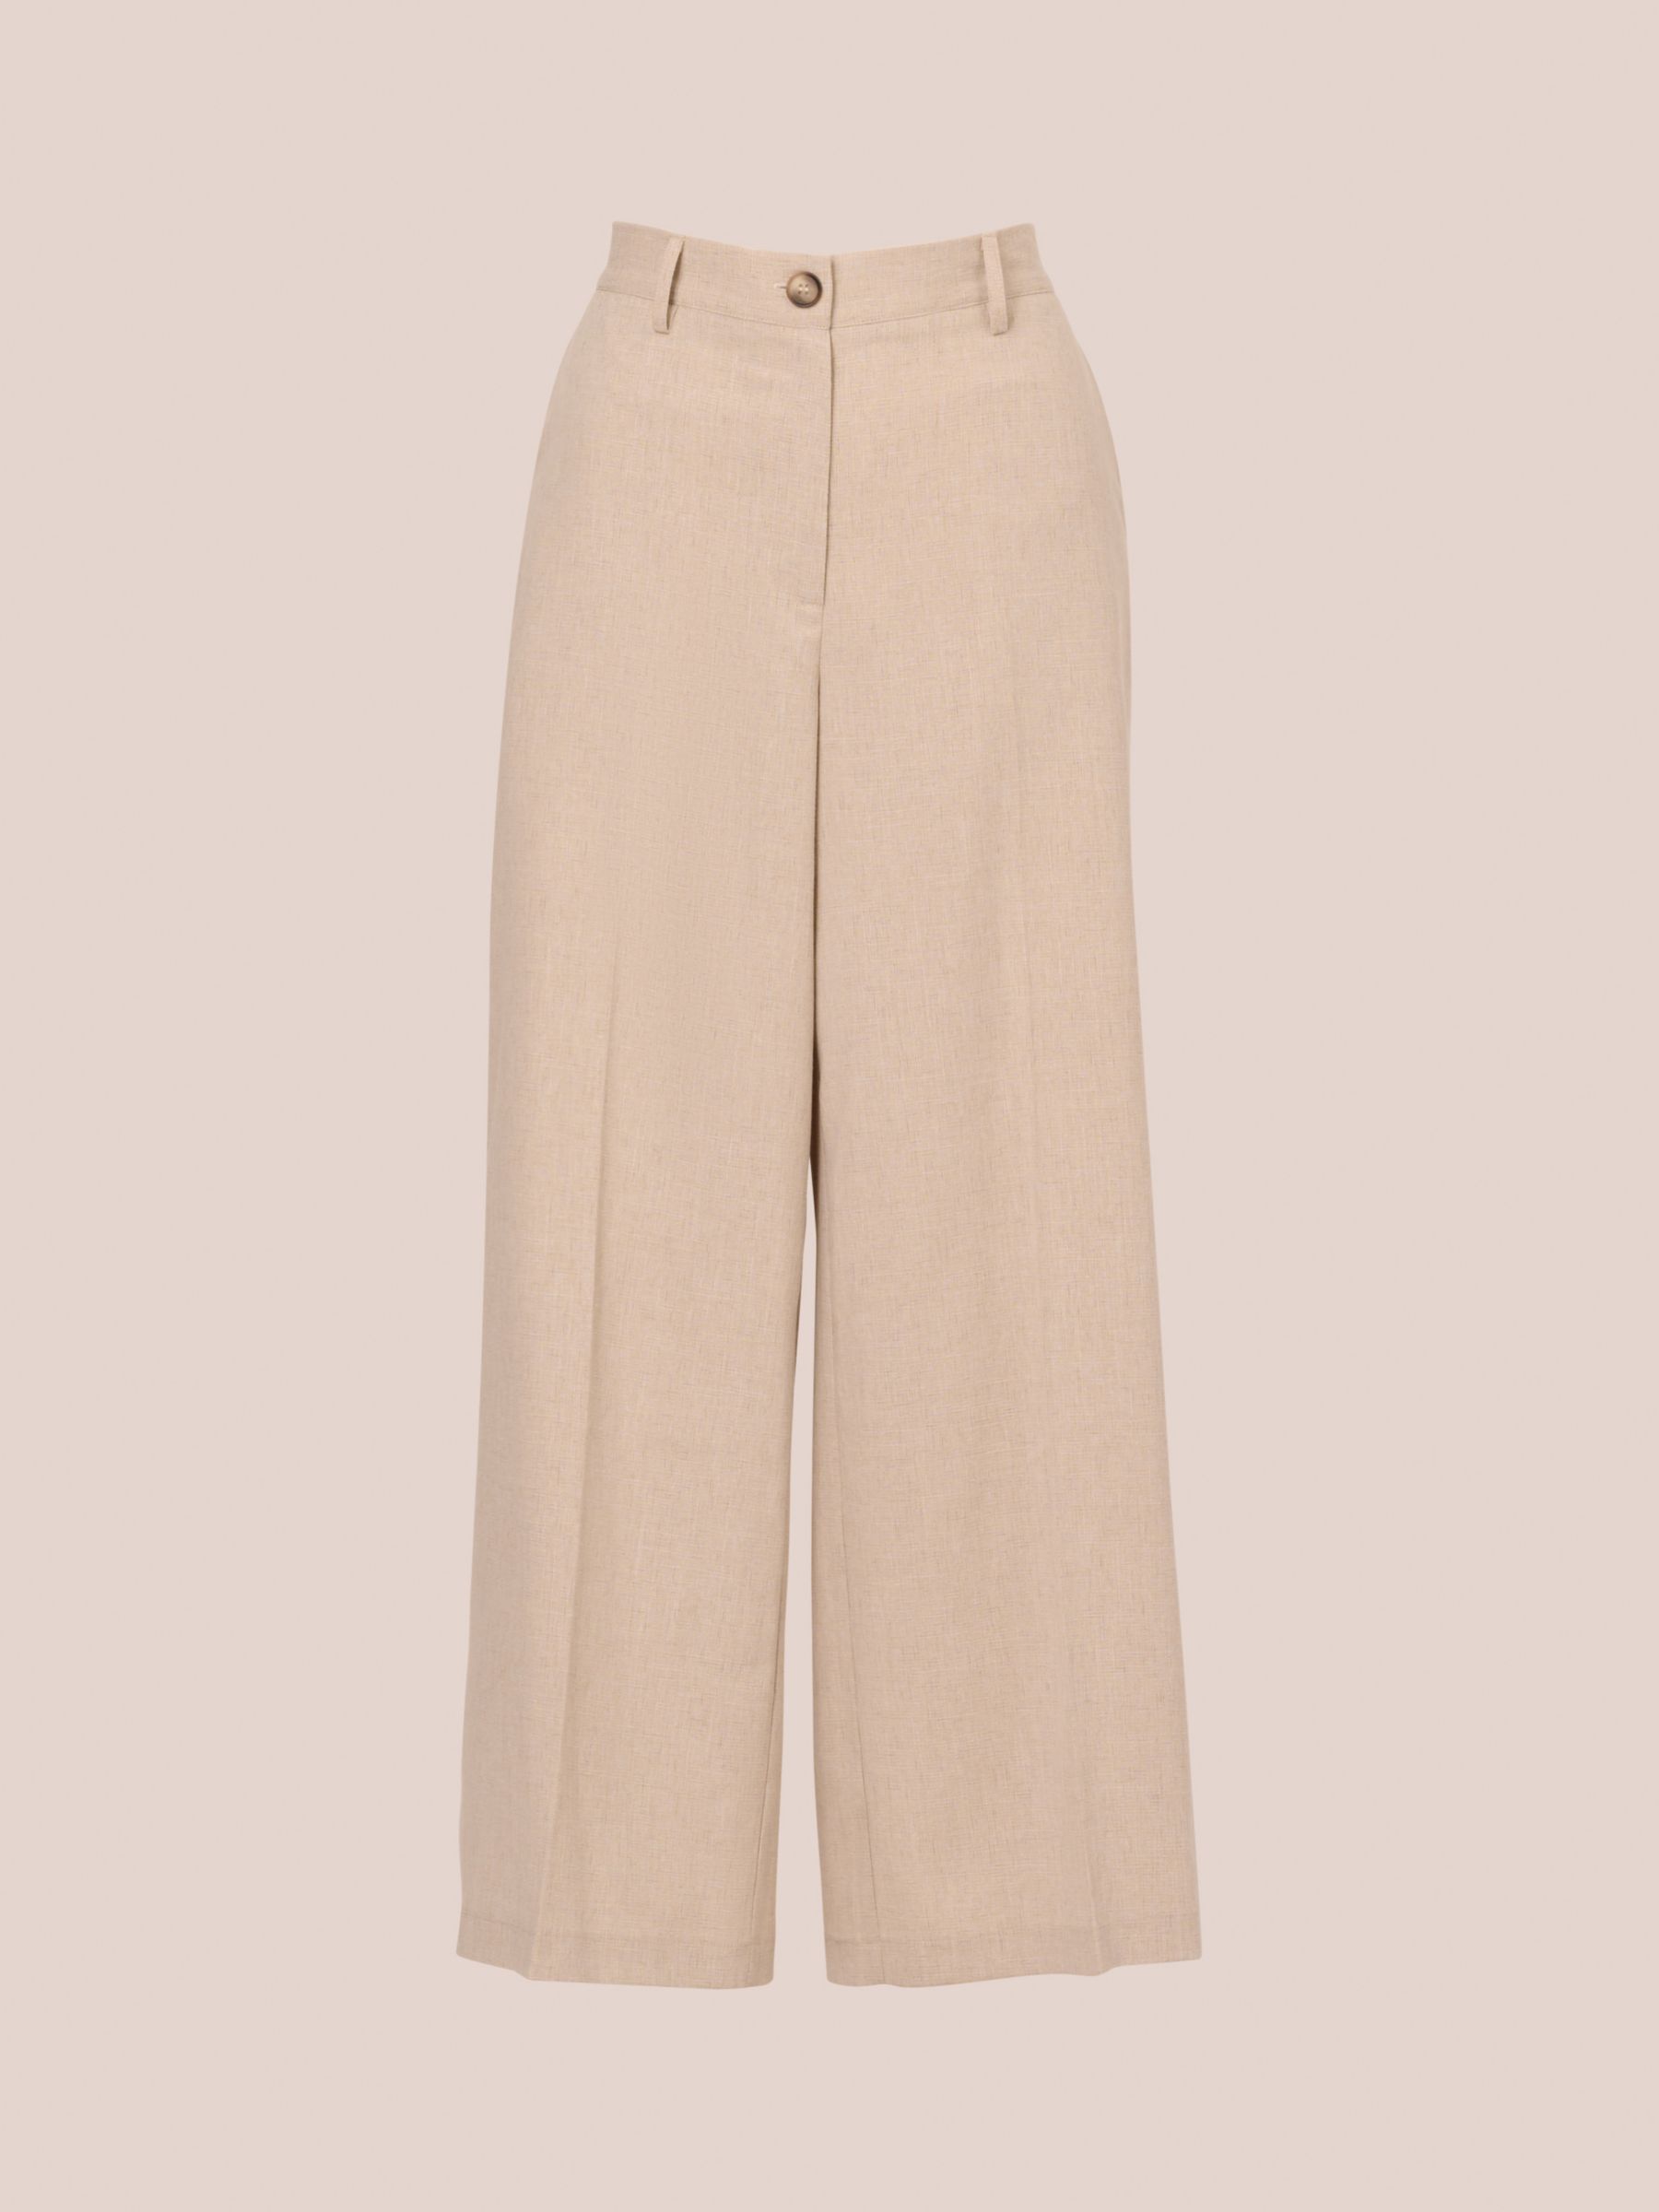 Adrianna Papell Wide Leg Utility Trousers, Flax, 18